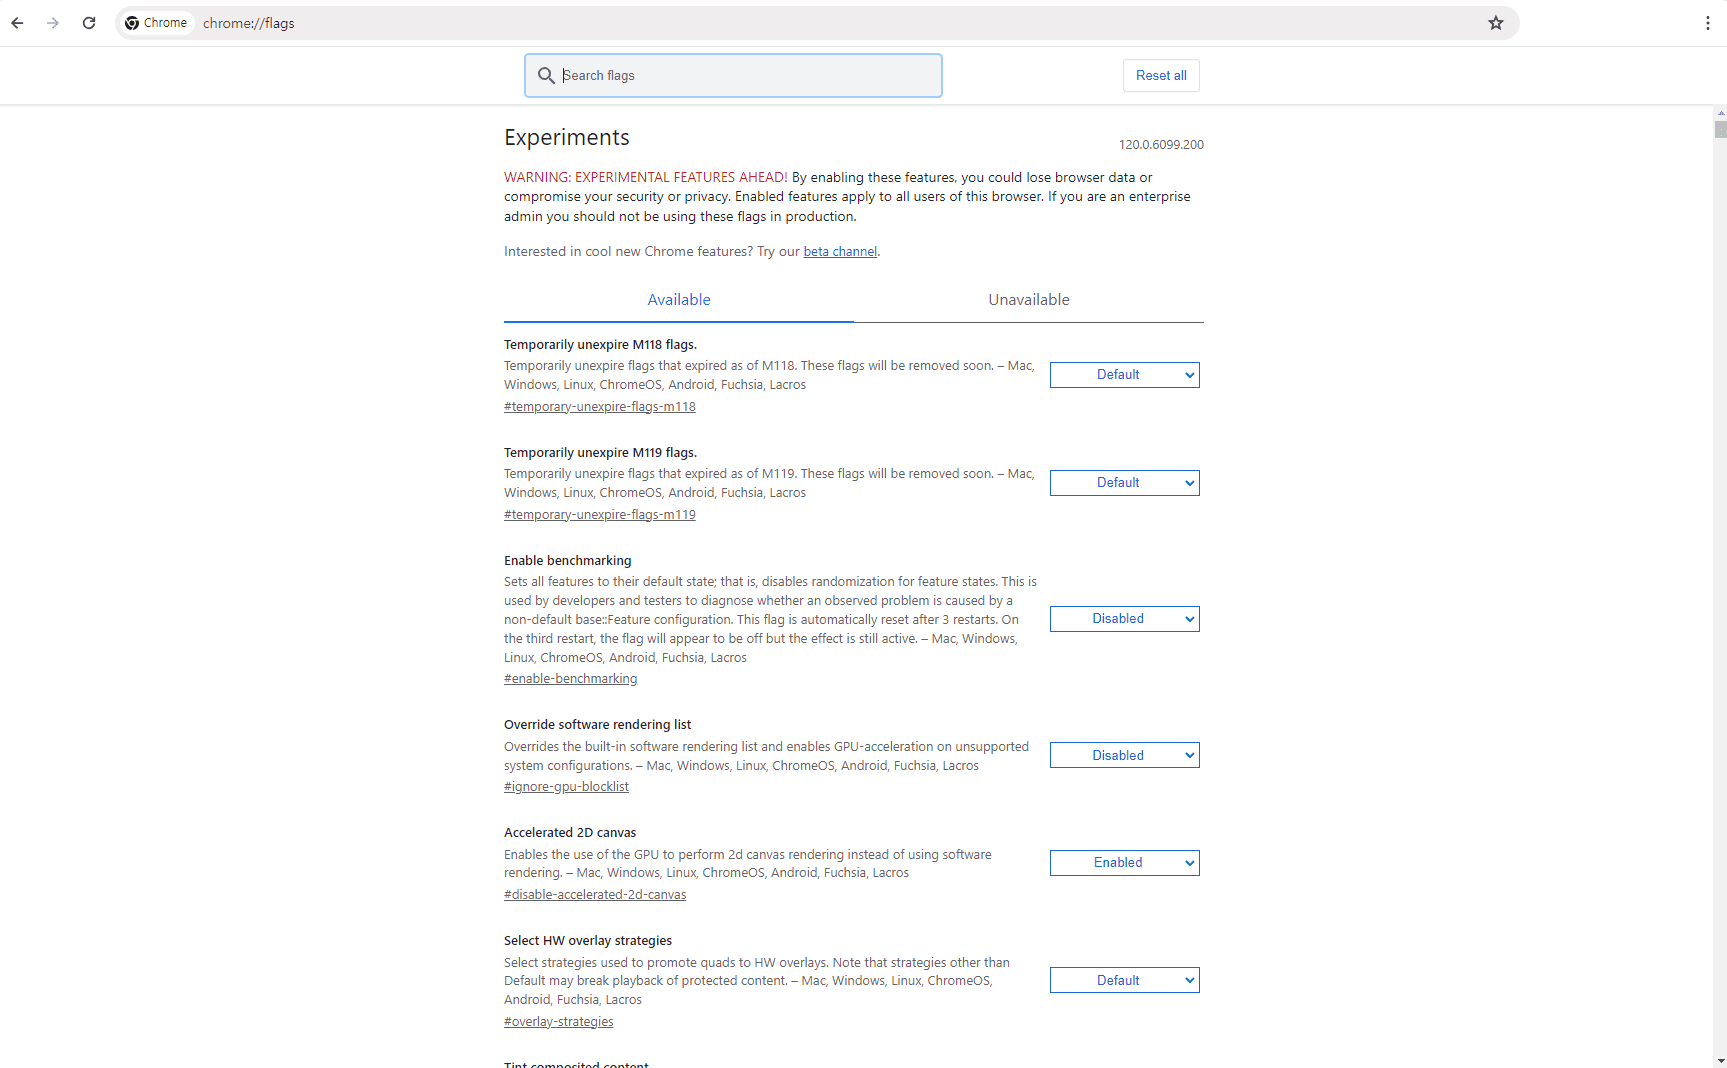 chrome-flags-page-experiments